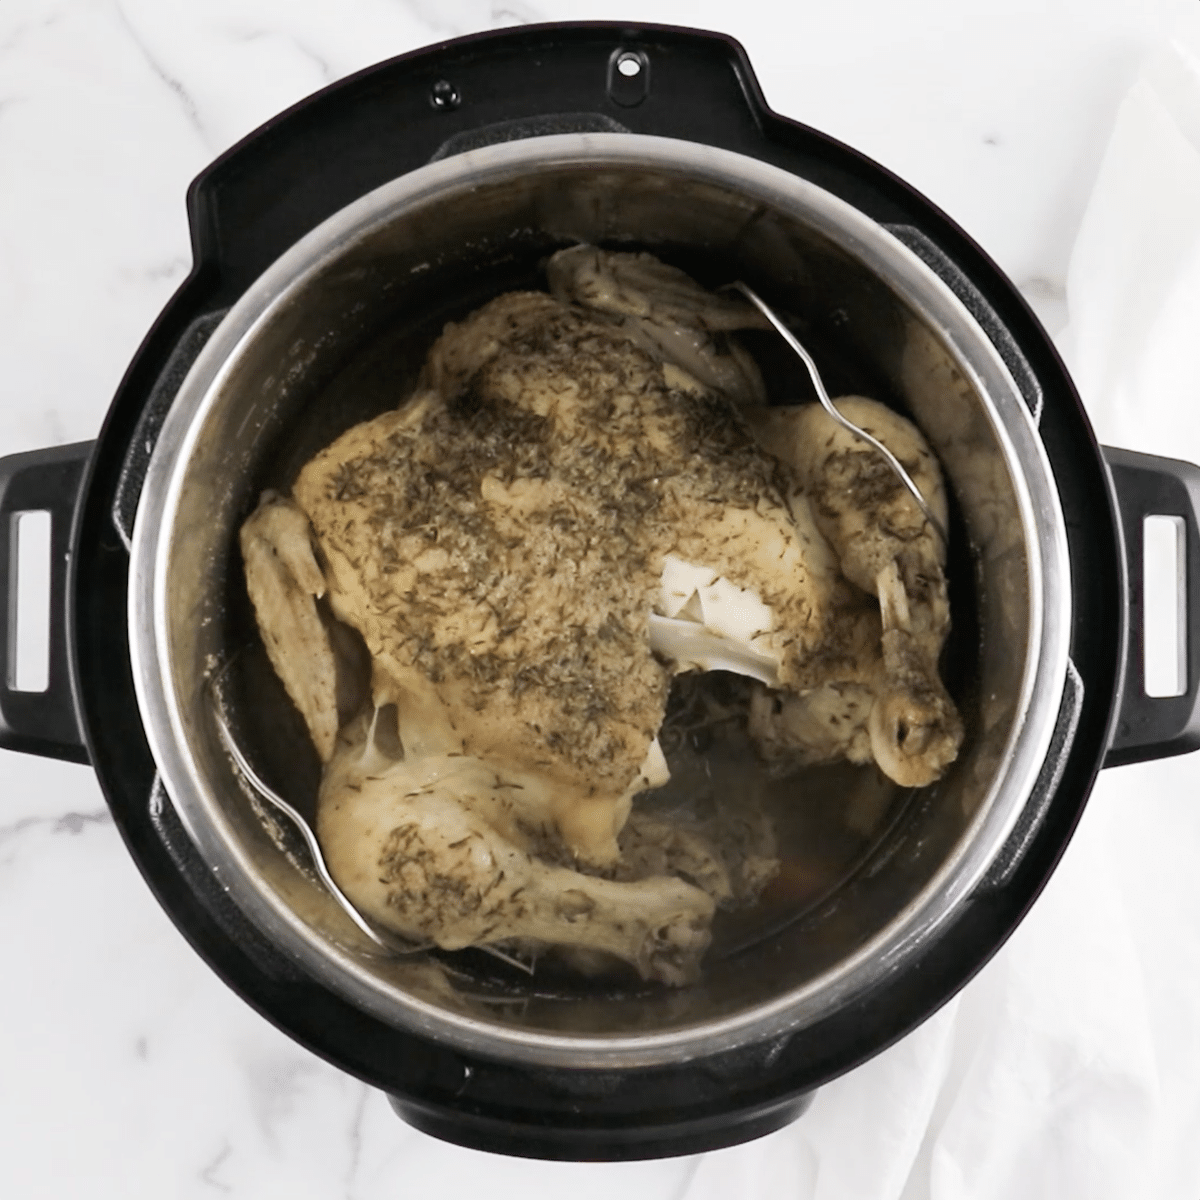 Cooked seasoned whole chicken in an Instant Pot